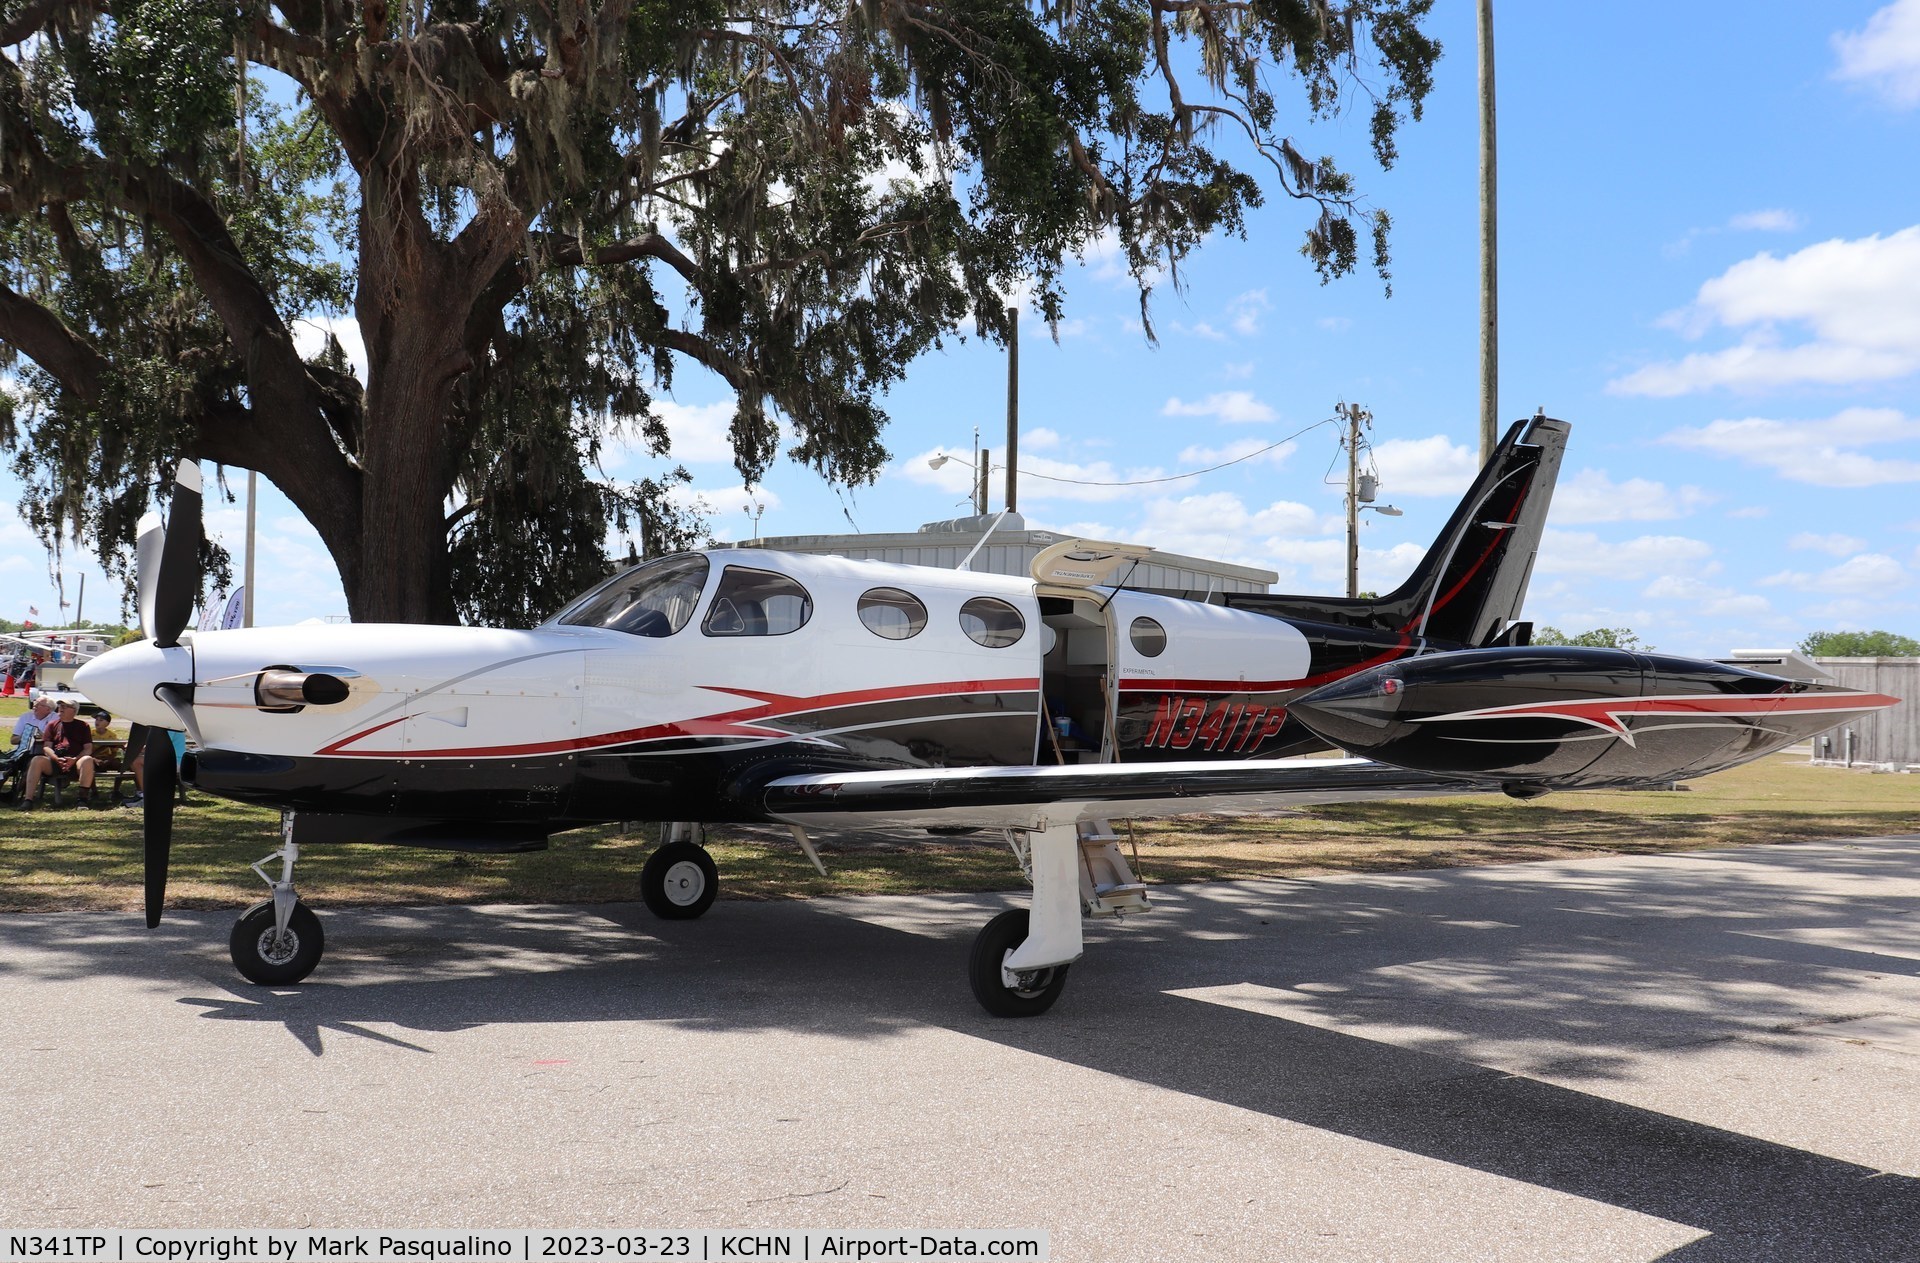 N341TP, 2004 Spearman Michael 341 C/N 001, Converted to a single engine turboprop (Walter 601D)